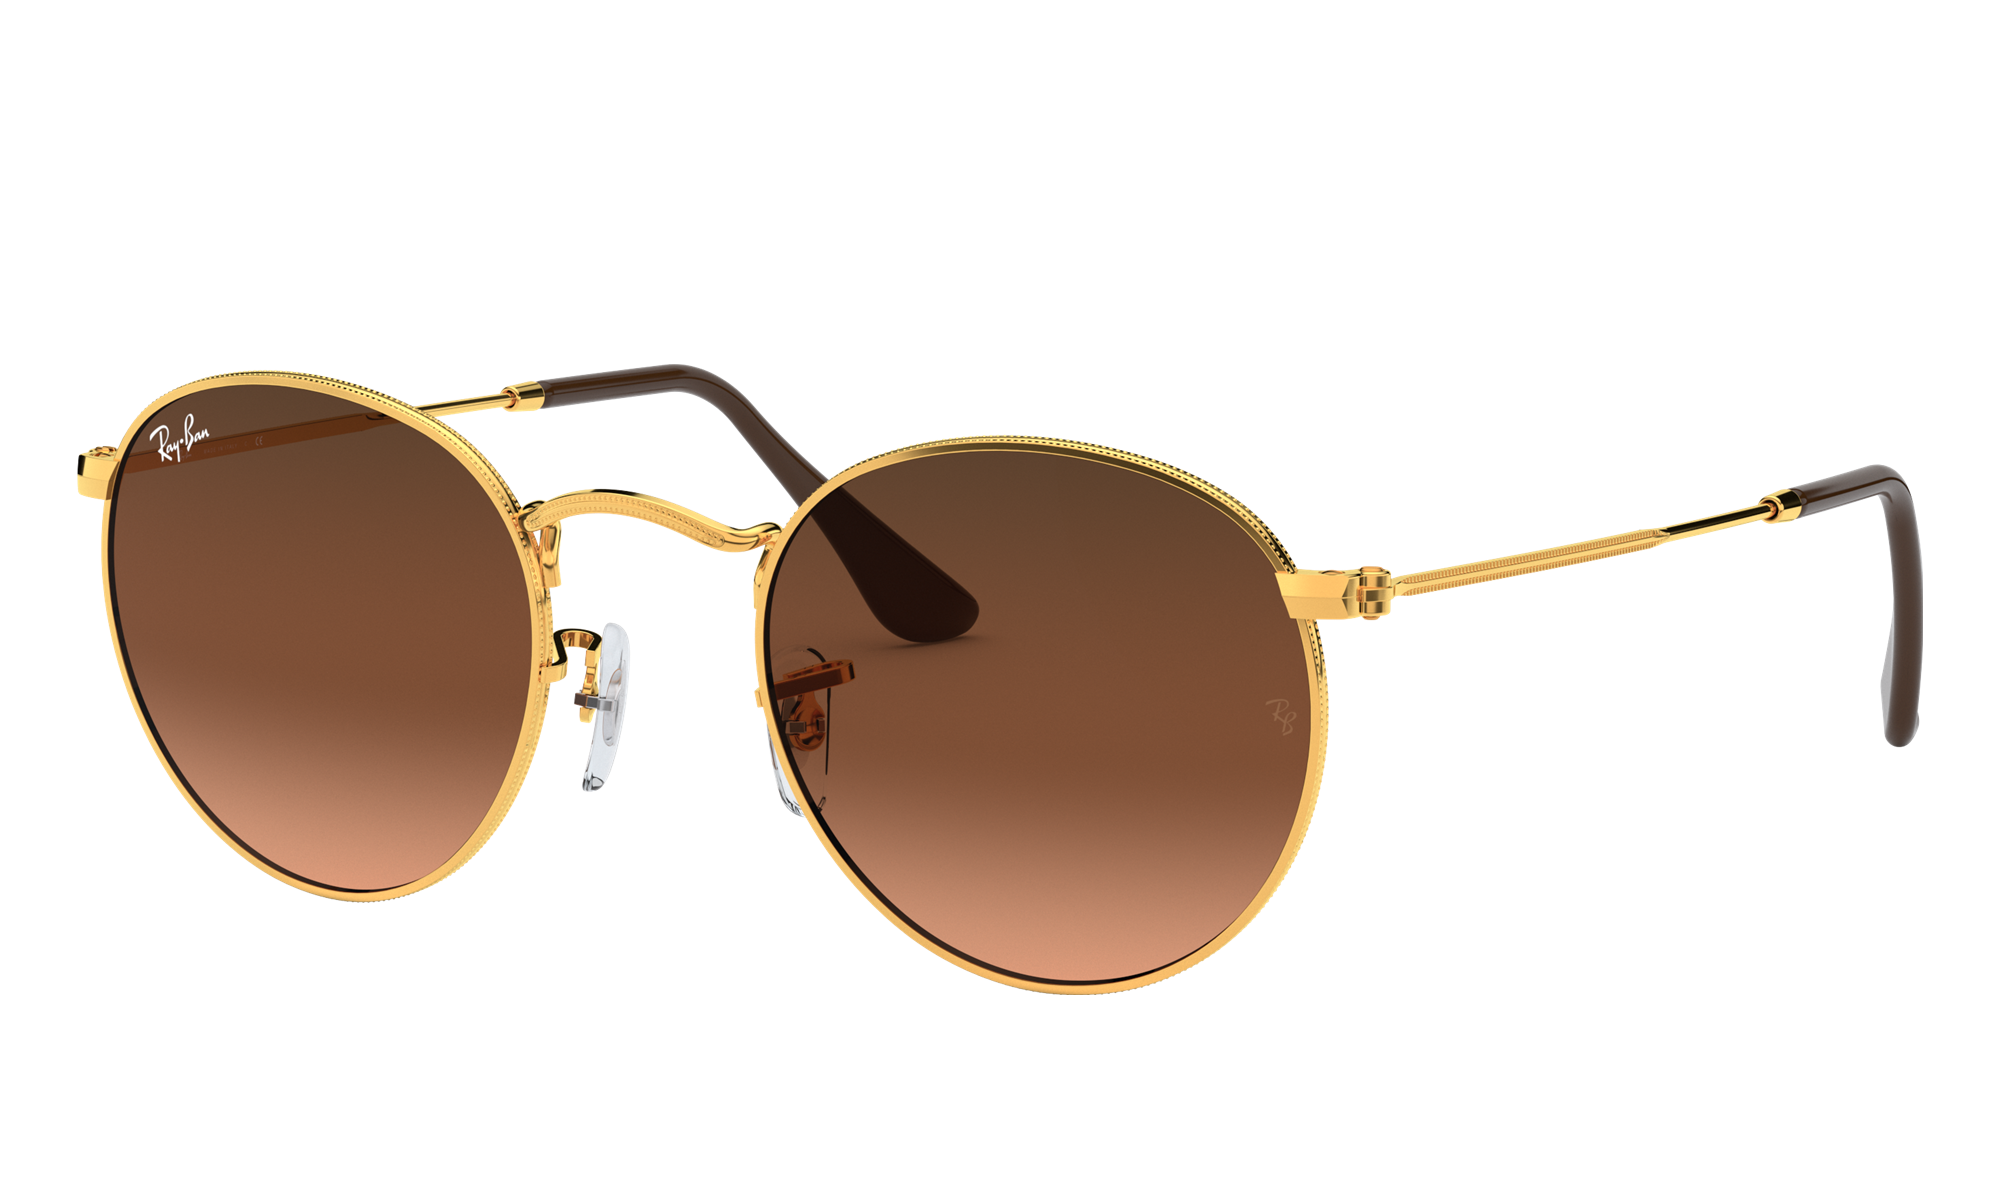 Ray-Ban Unisex Rb3447 Light Bronze Size: Small